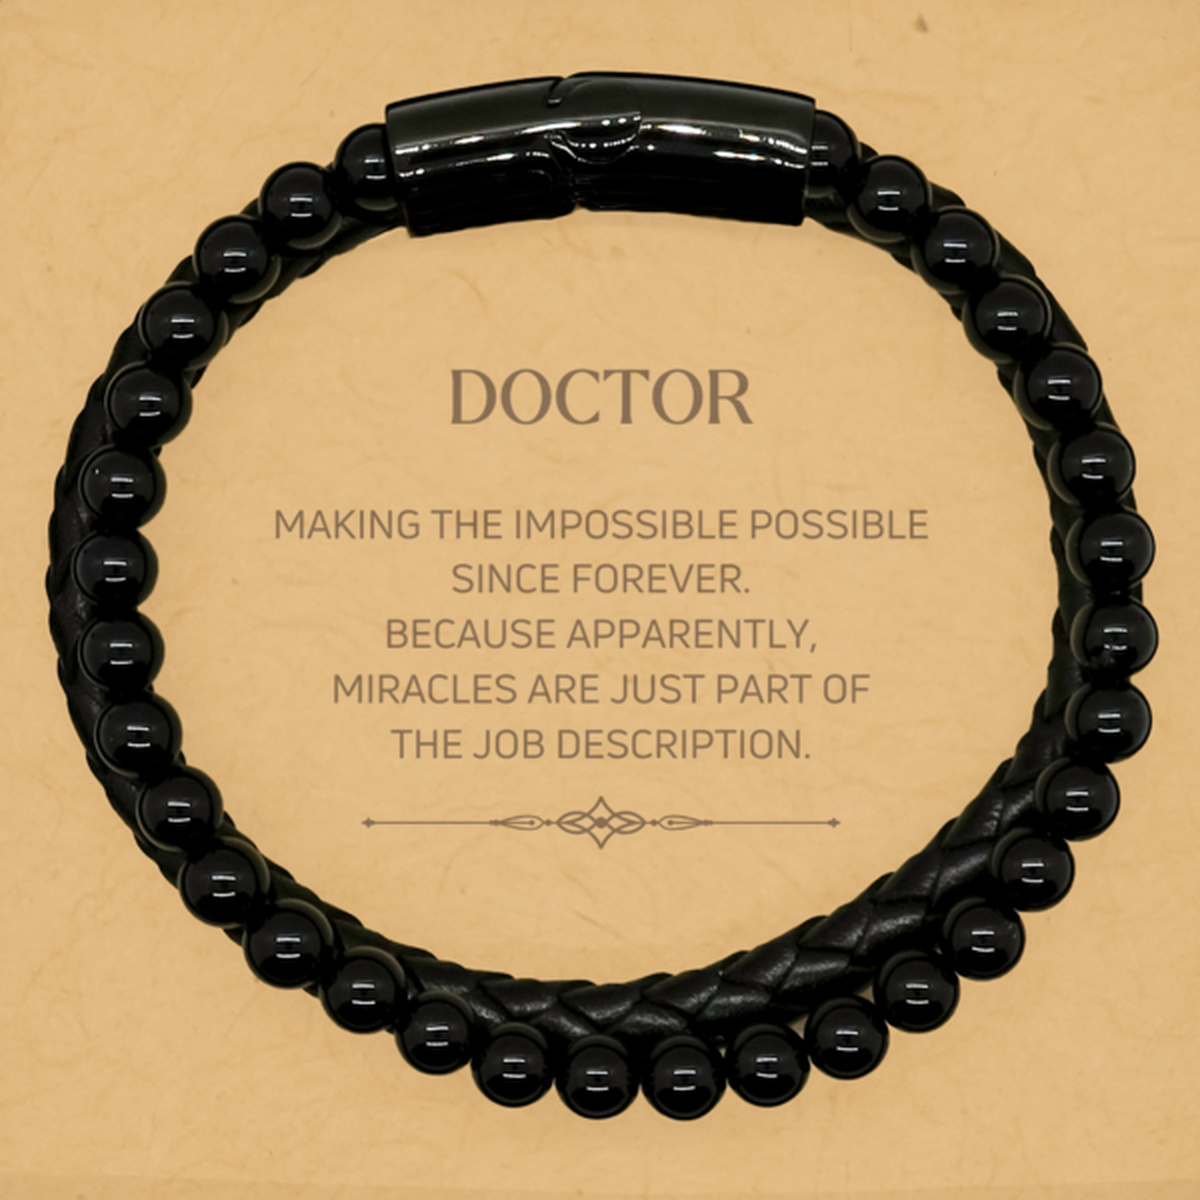 Funny Doctor Gifts, Miracles are just part of the job description, Inspirational Birthday Stone Leather Bracelets For Doctor, Men, Women, Coworkers, Friends, Boss